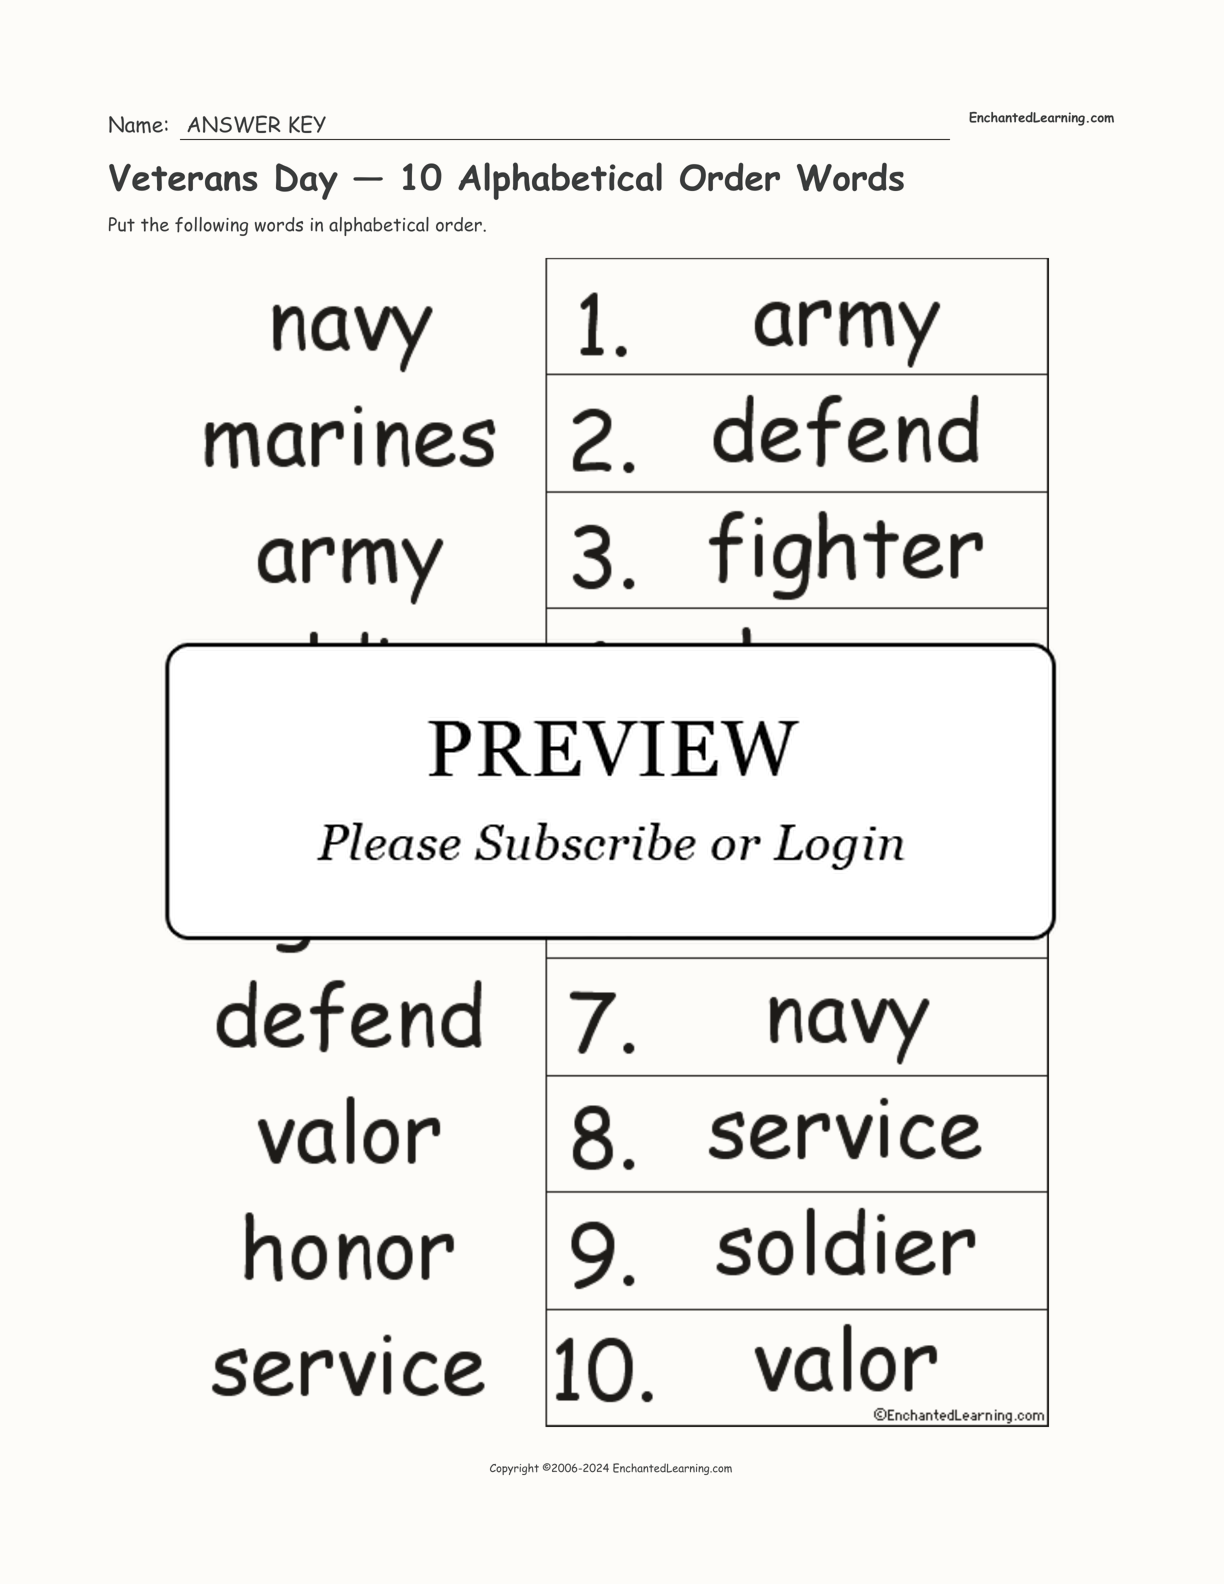 Veterans Day — 10 Alphabetical Order Words interactive worksheet page 2